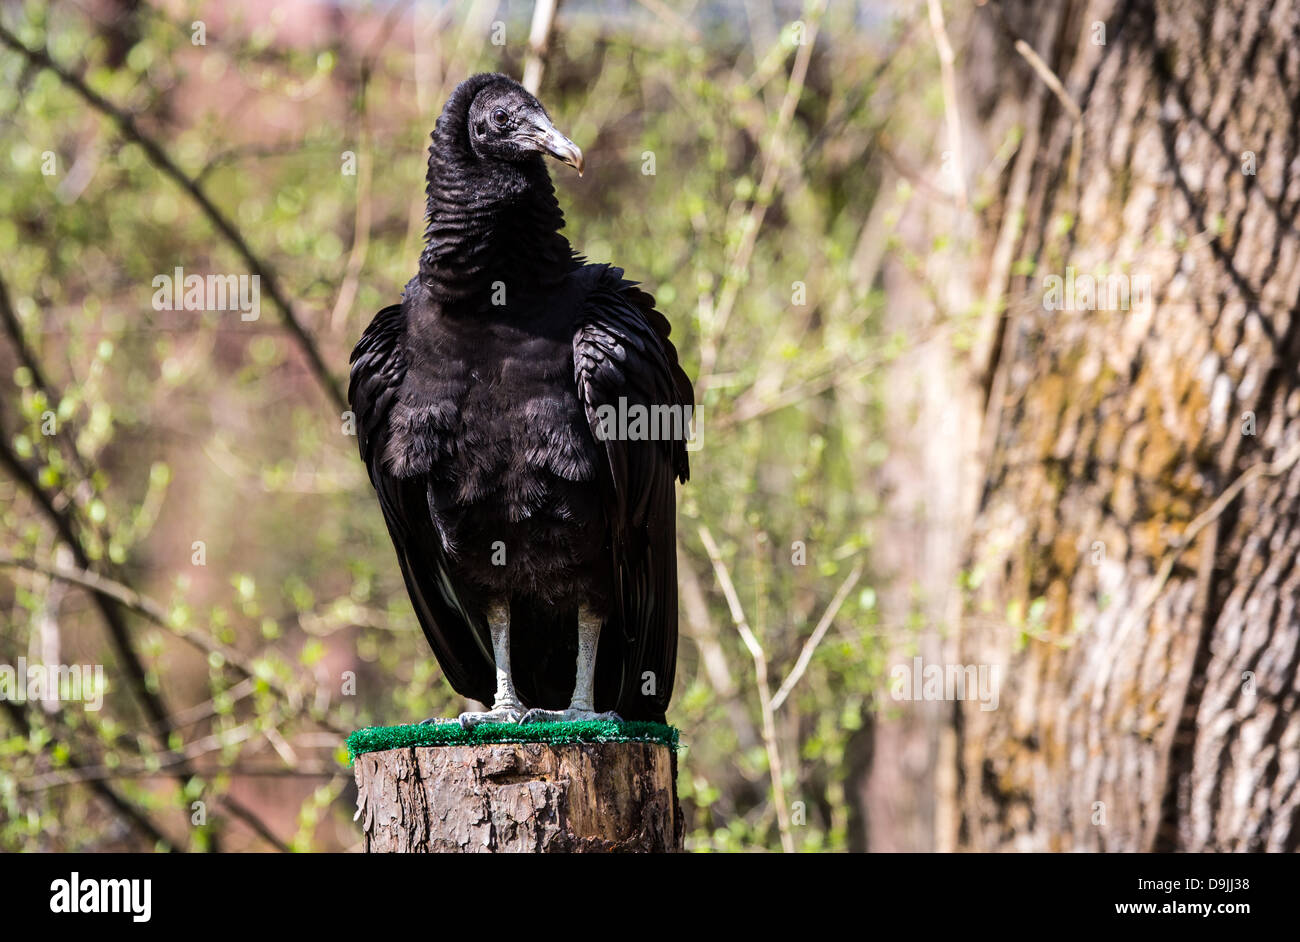 A common Black Vulture the scavenger bird seen often on the side of the road. Stock Photo